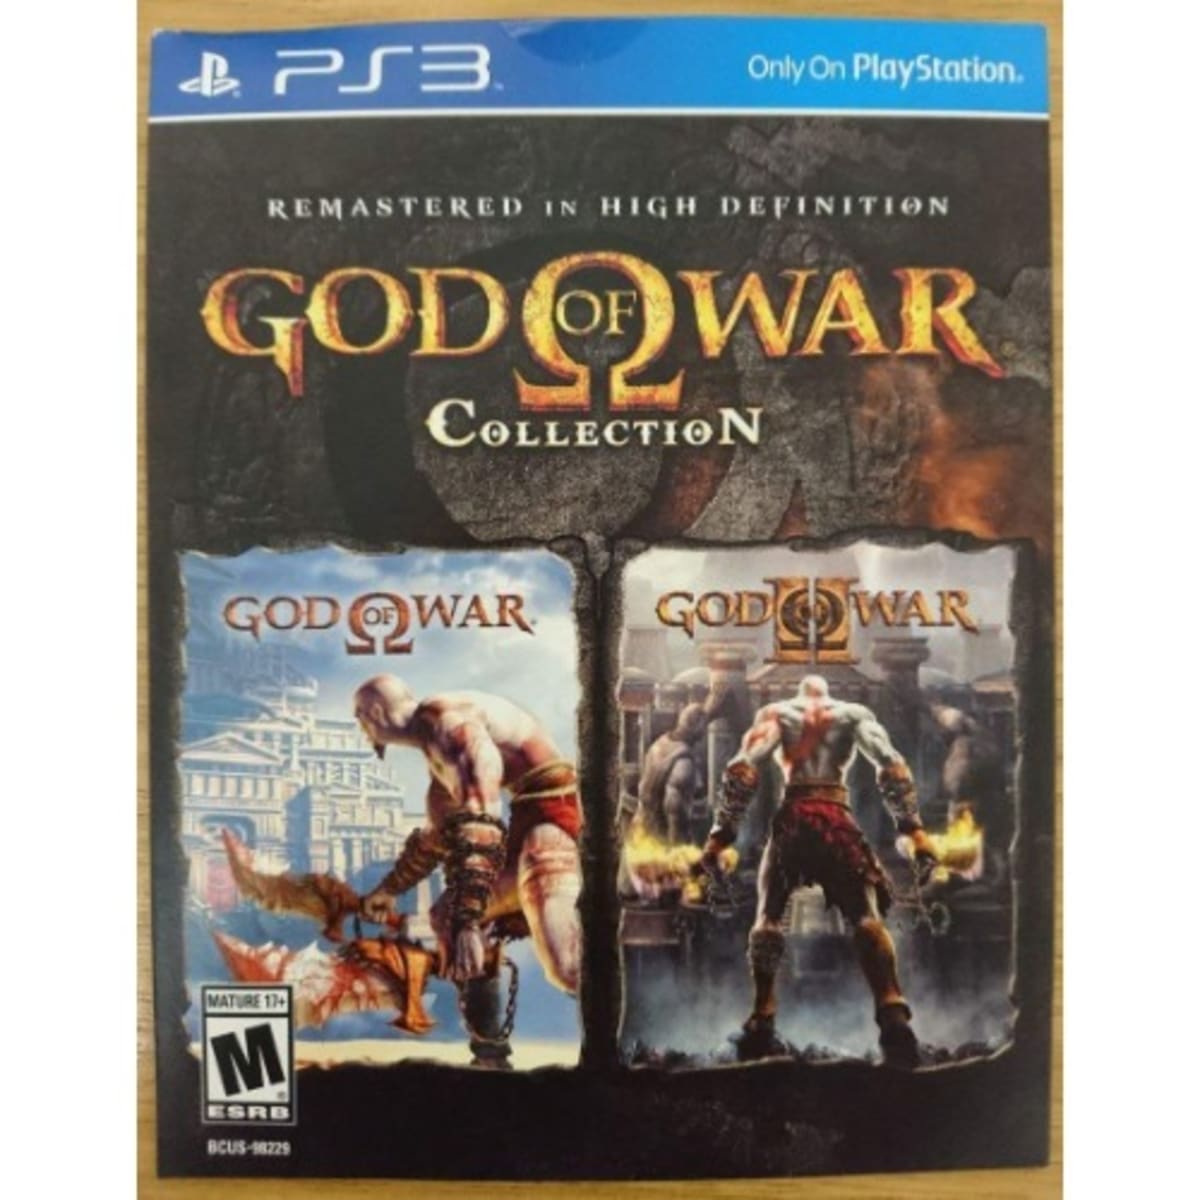 God of War: Collection - PlayStation 3, PlayStation 3